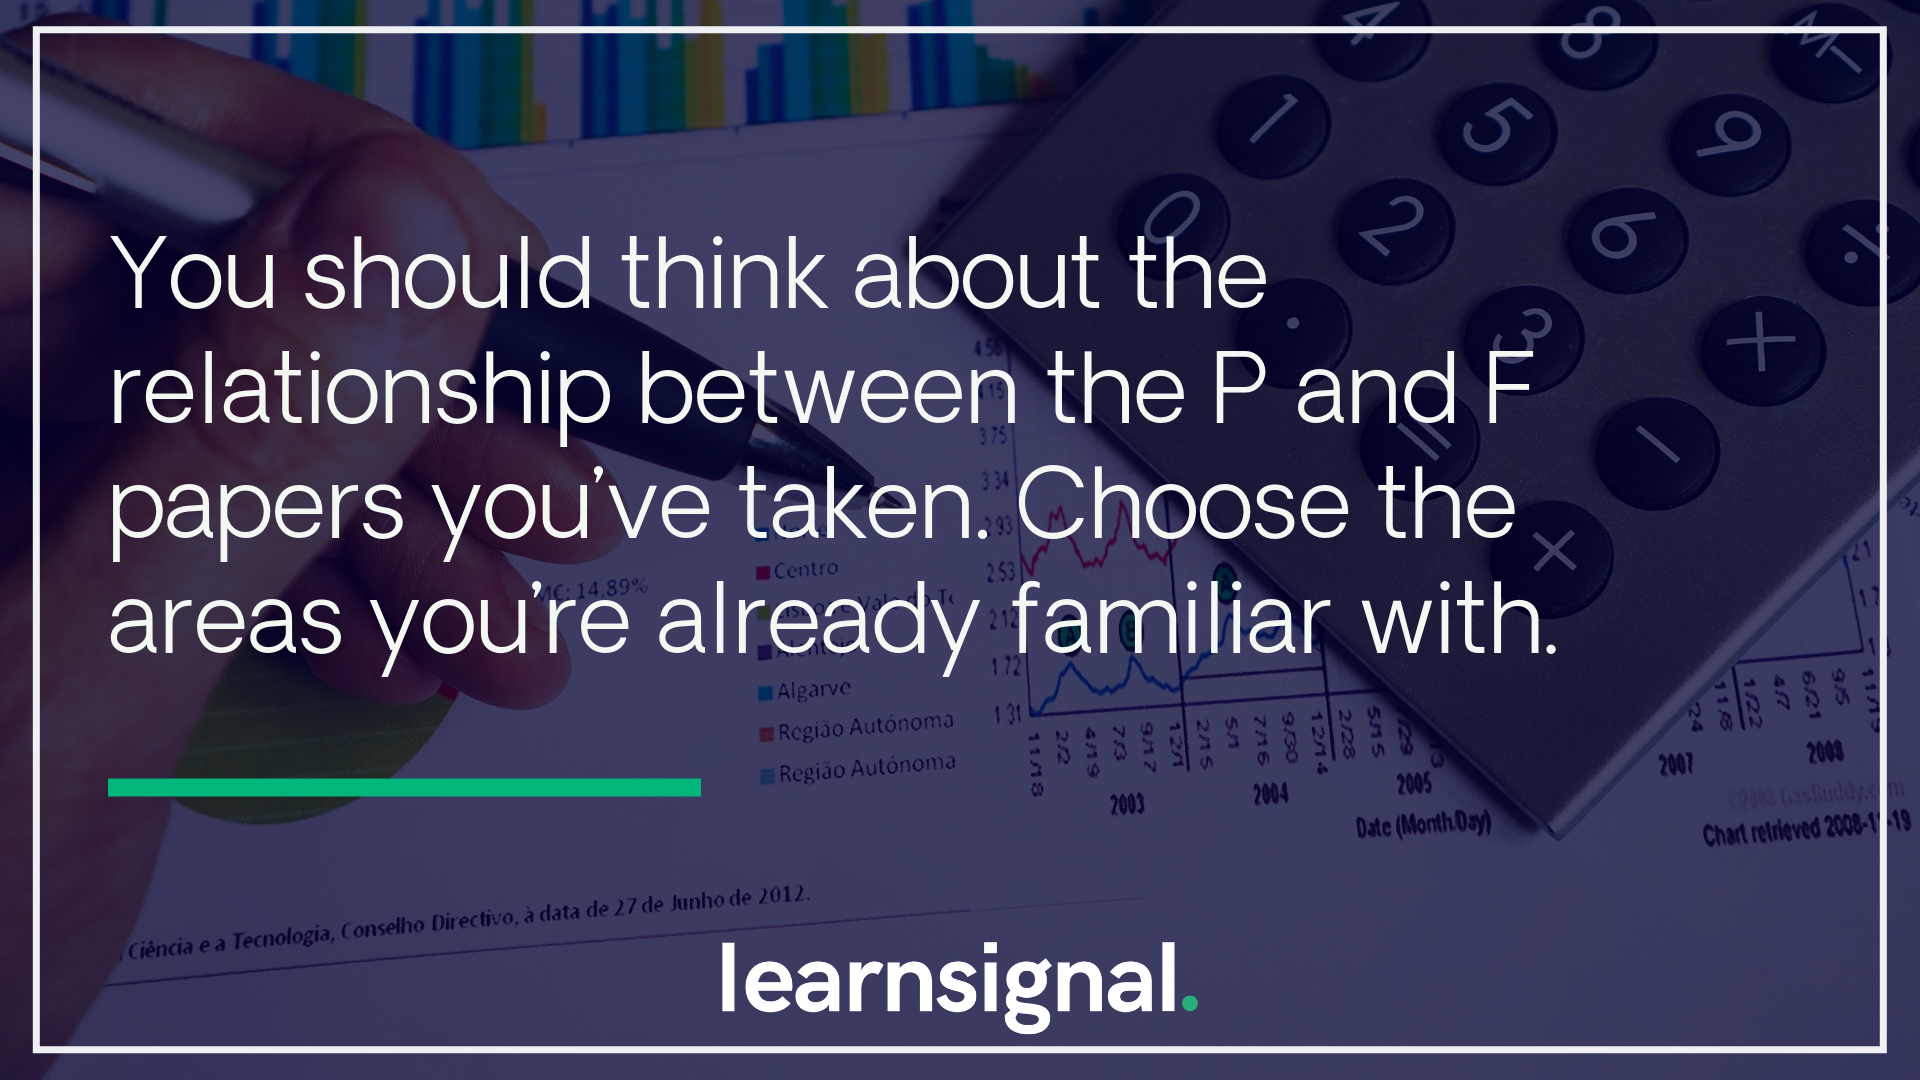 You should think about the relationship Learnsignal